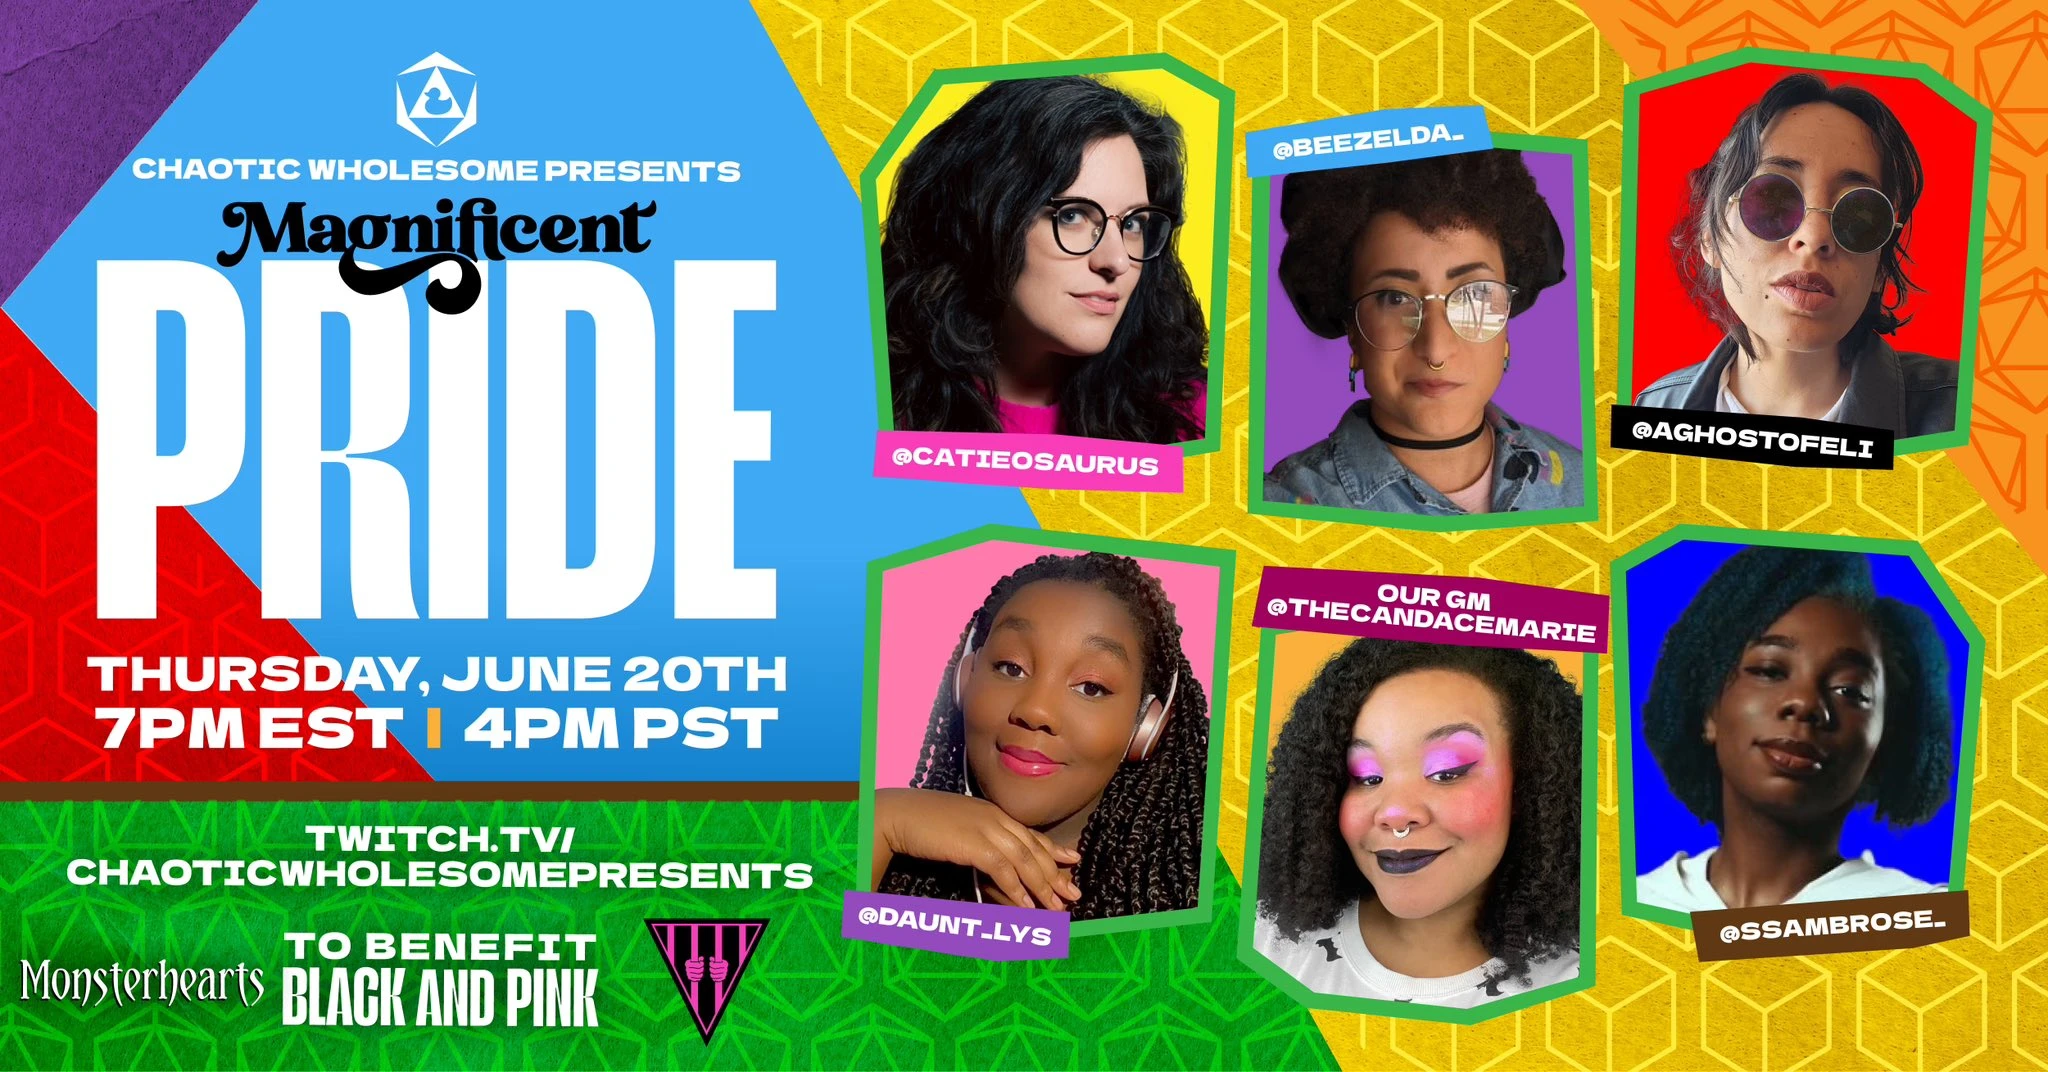 What would Pride be without Monsterhearts? Meet the cast of Magnificent Pride Table 3!